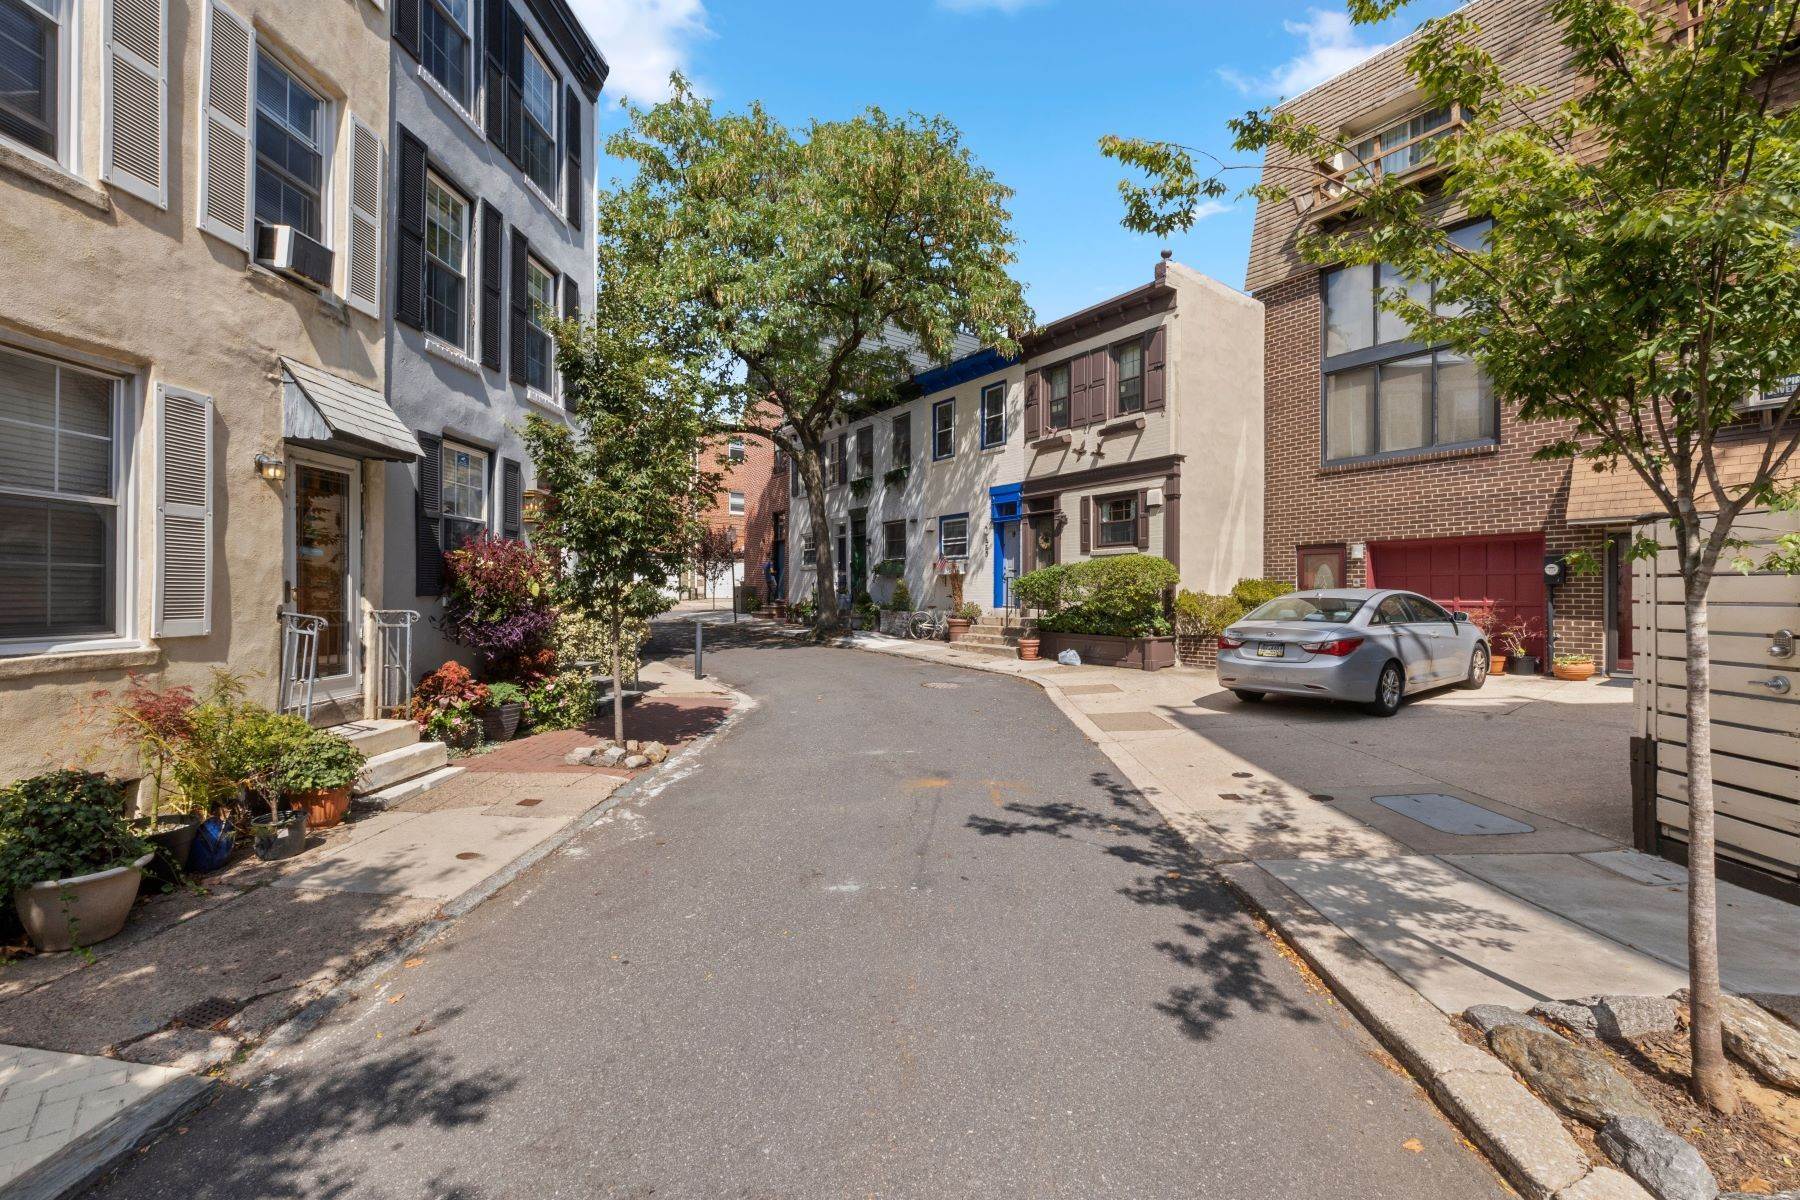 36. Single Family Homes for Sale at 558 North Judson Street, Philadelphia, PA 19130 558 North Judson Street Philadelphia, Pennsylvania 19130 United States